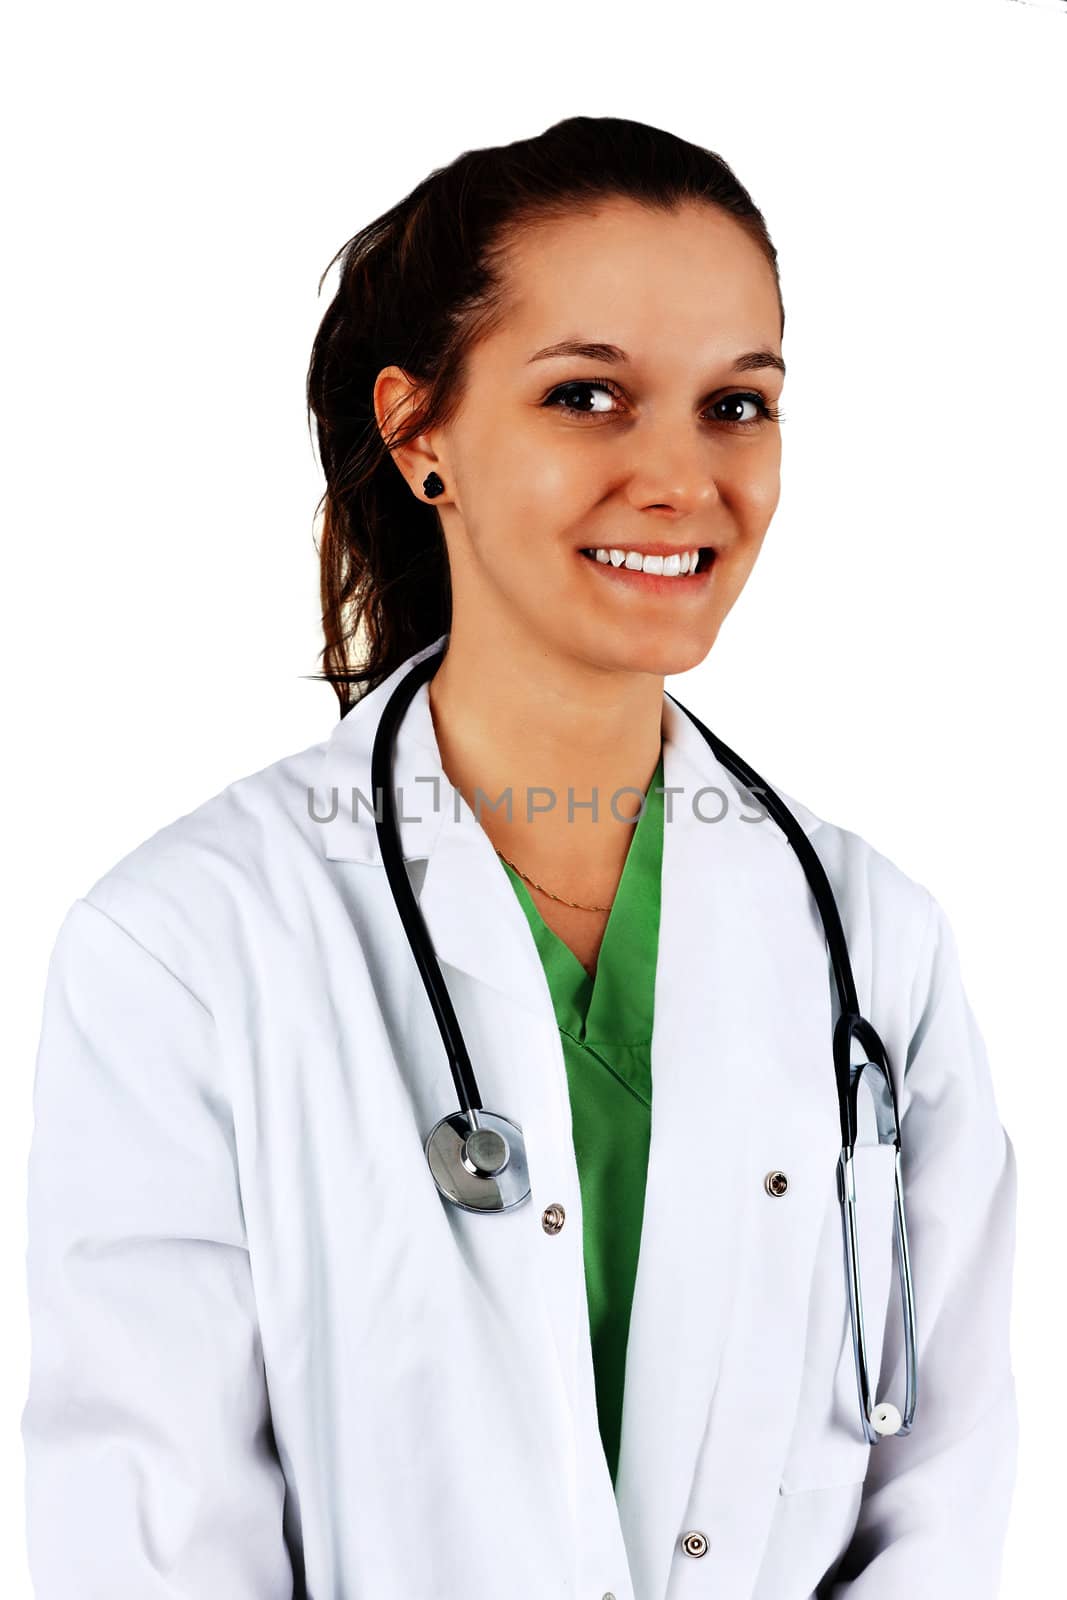 Portrait of young woman doctor, residant or medicine student